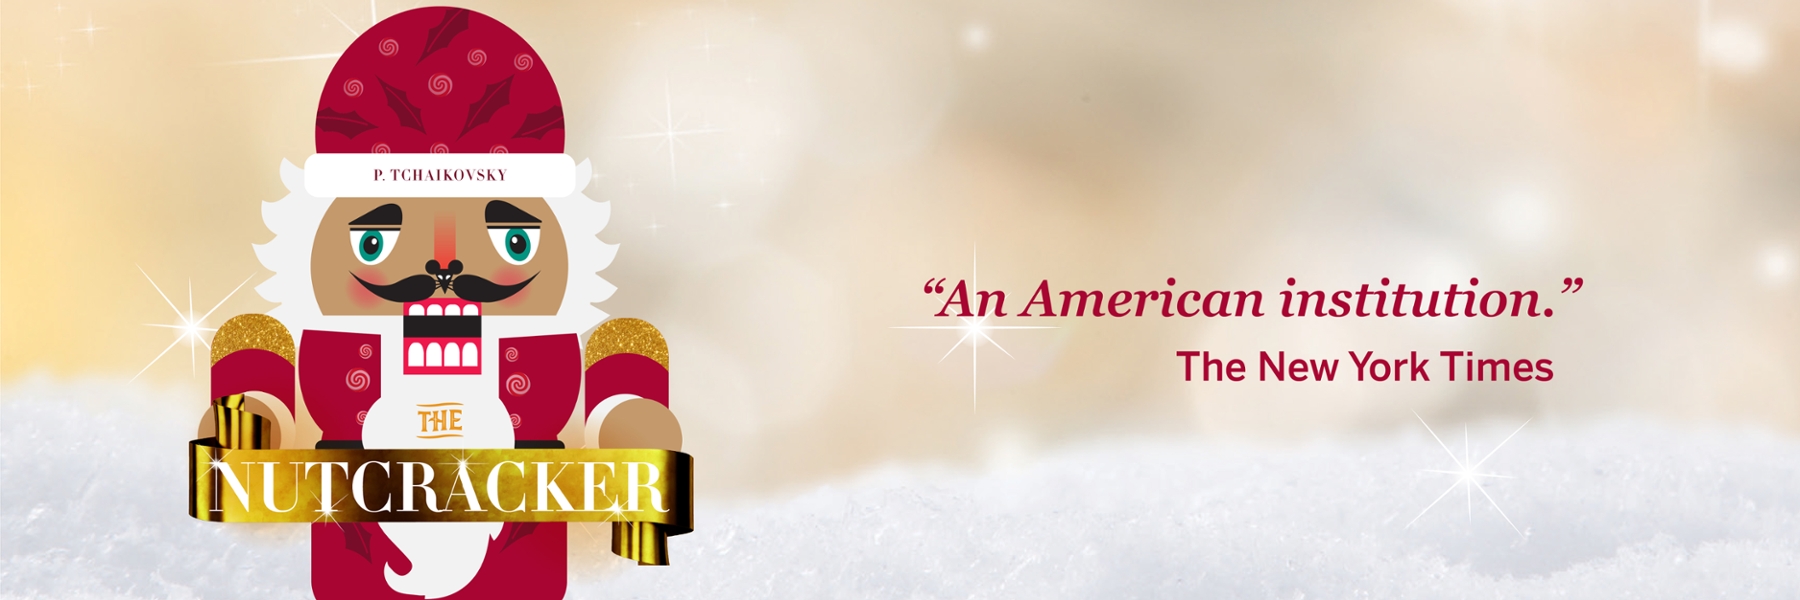 The Nutcracker artwork with quote “An American institution.” -The New York Times 